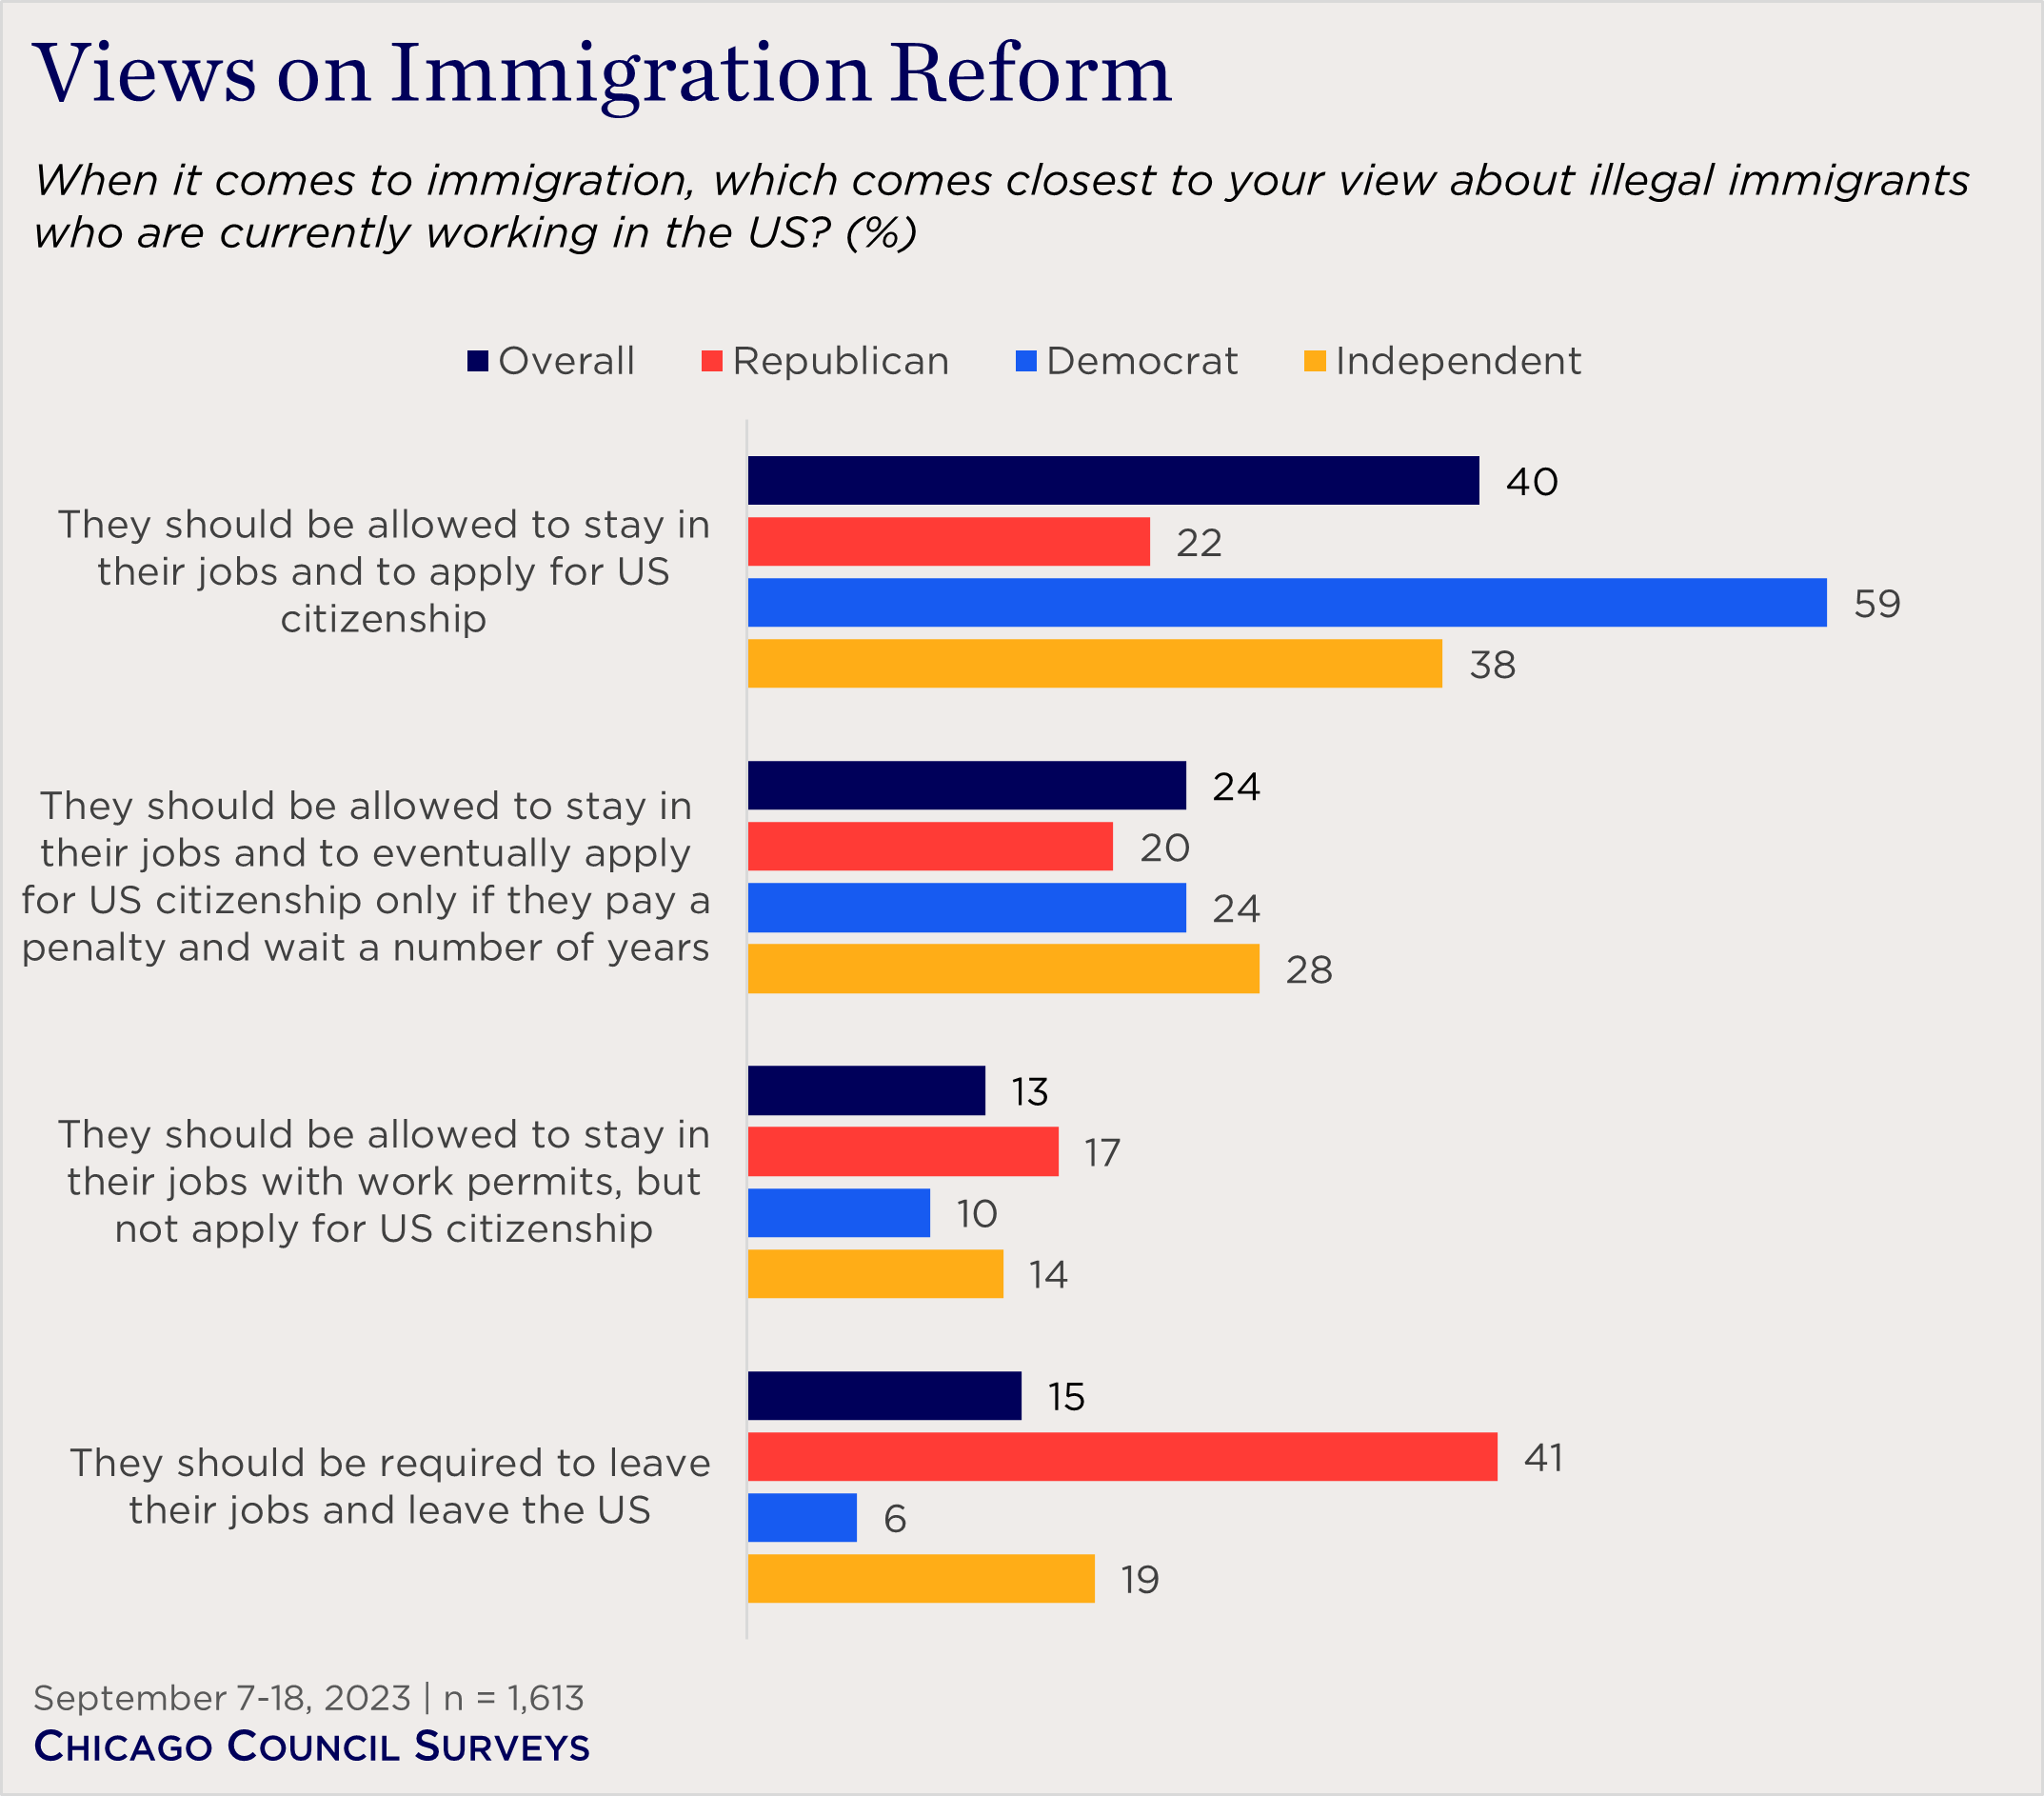 "bar chart showing partisan views on immigration reform"